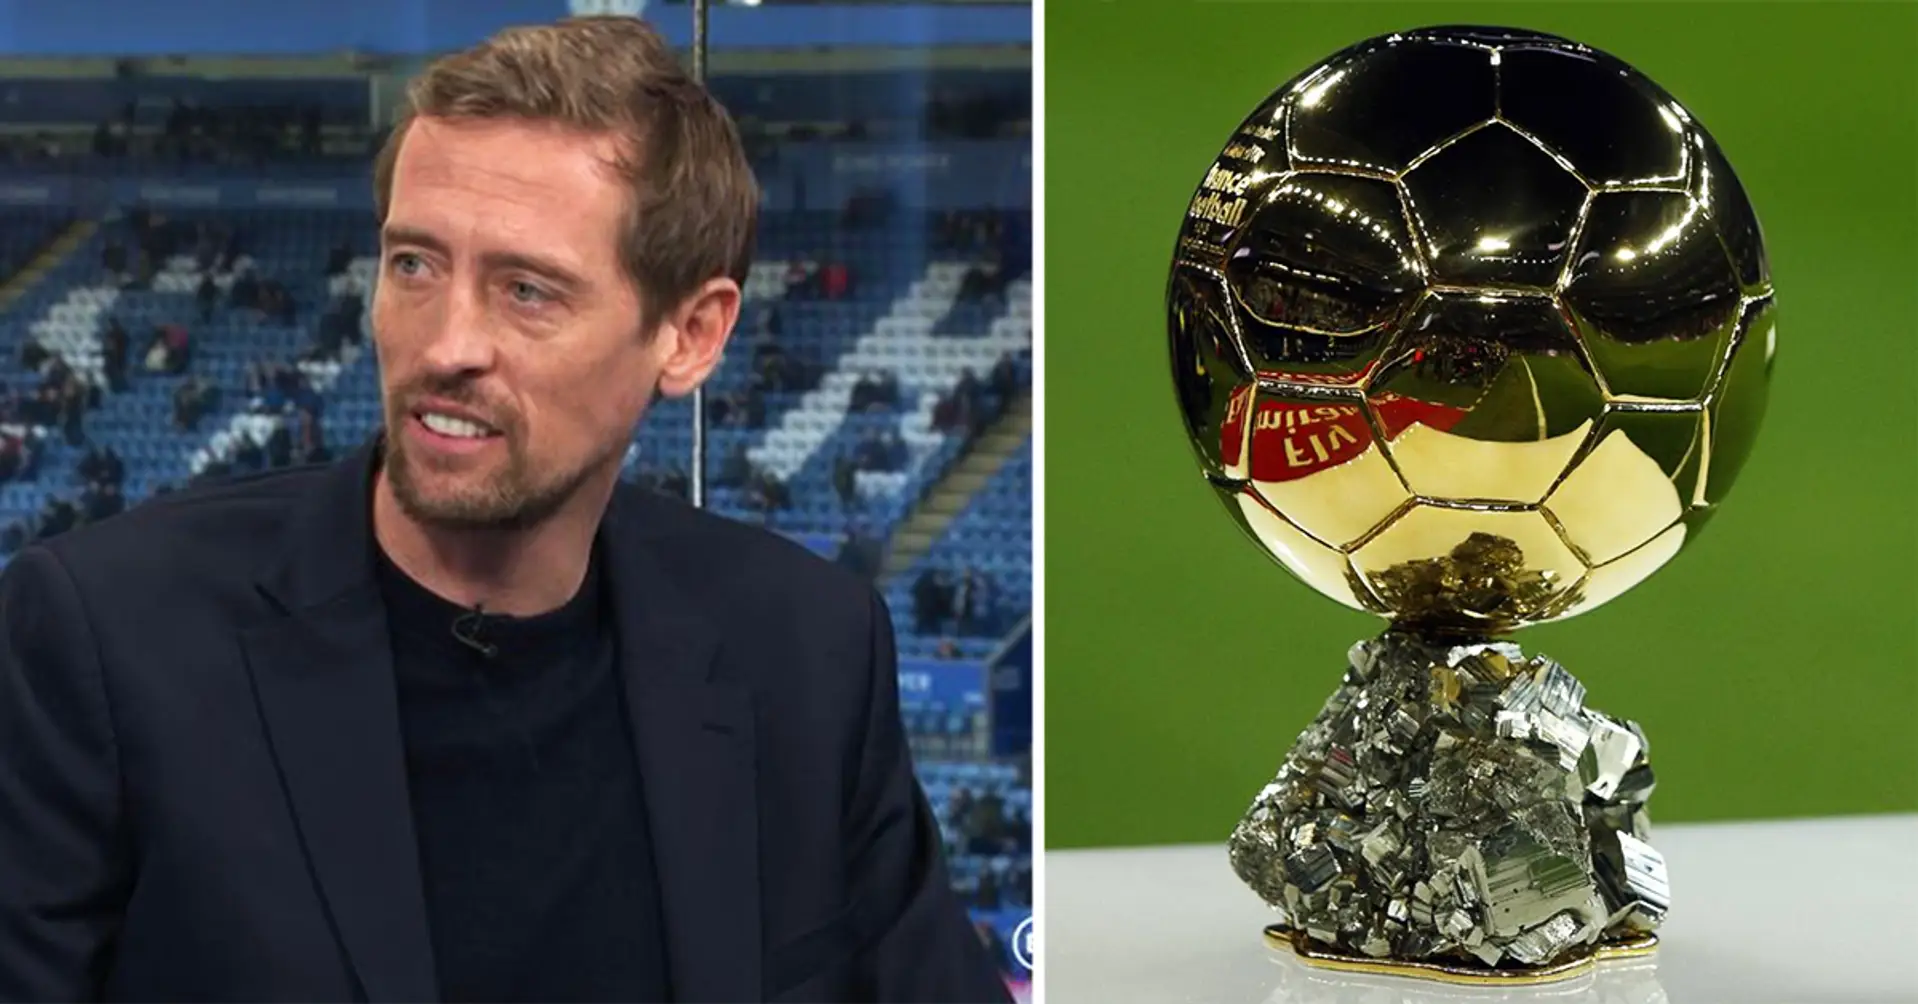 ‘Give it to him’. Peter Crouch names player who deserves to win 2021 Ballon d’Or